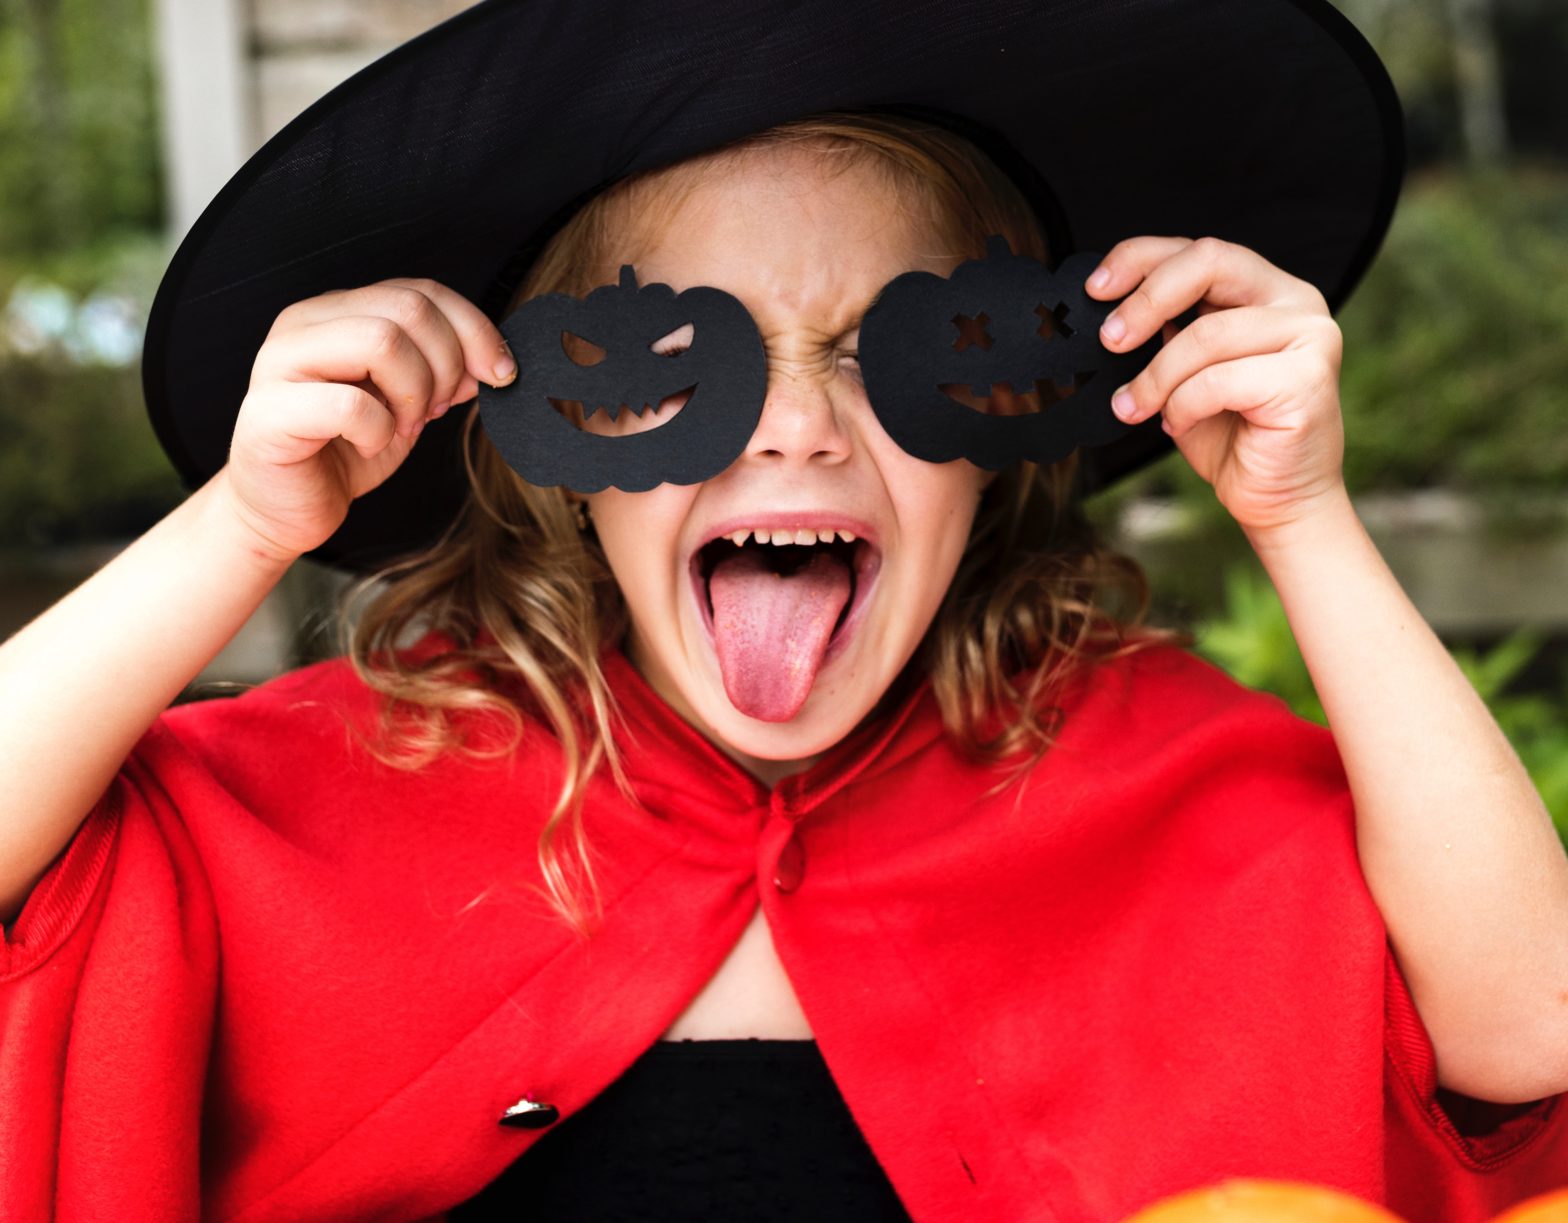 Never Fear, The Switch Witch Is Here. What do you do with all that leftover Halloween Candy? #switchwitch #halloween #parentingtips